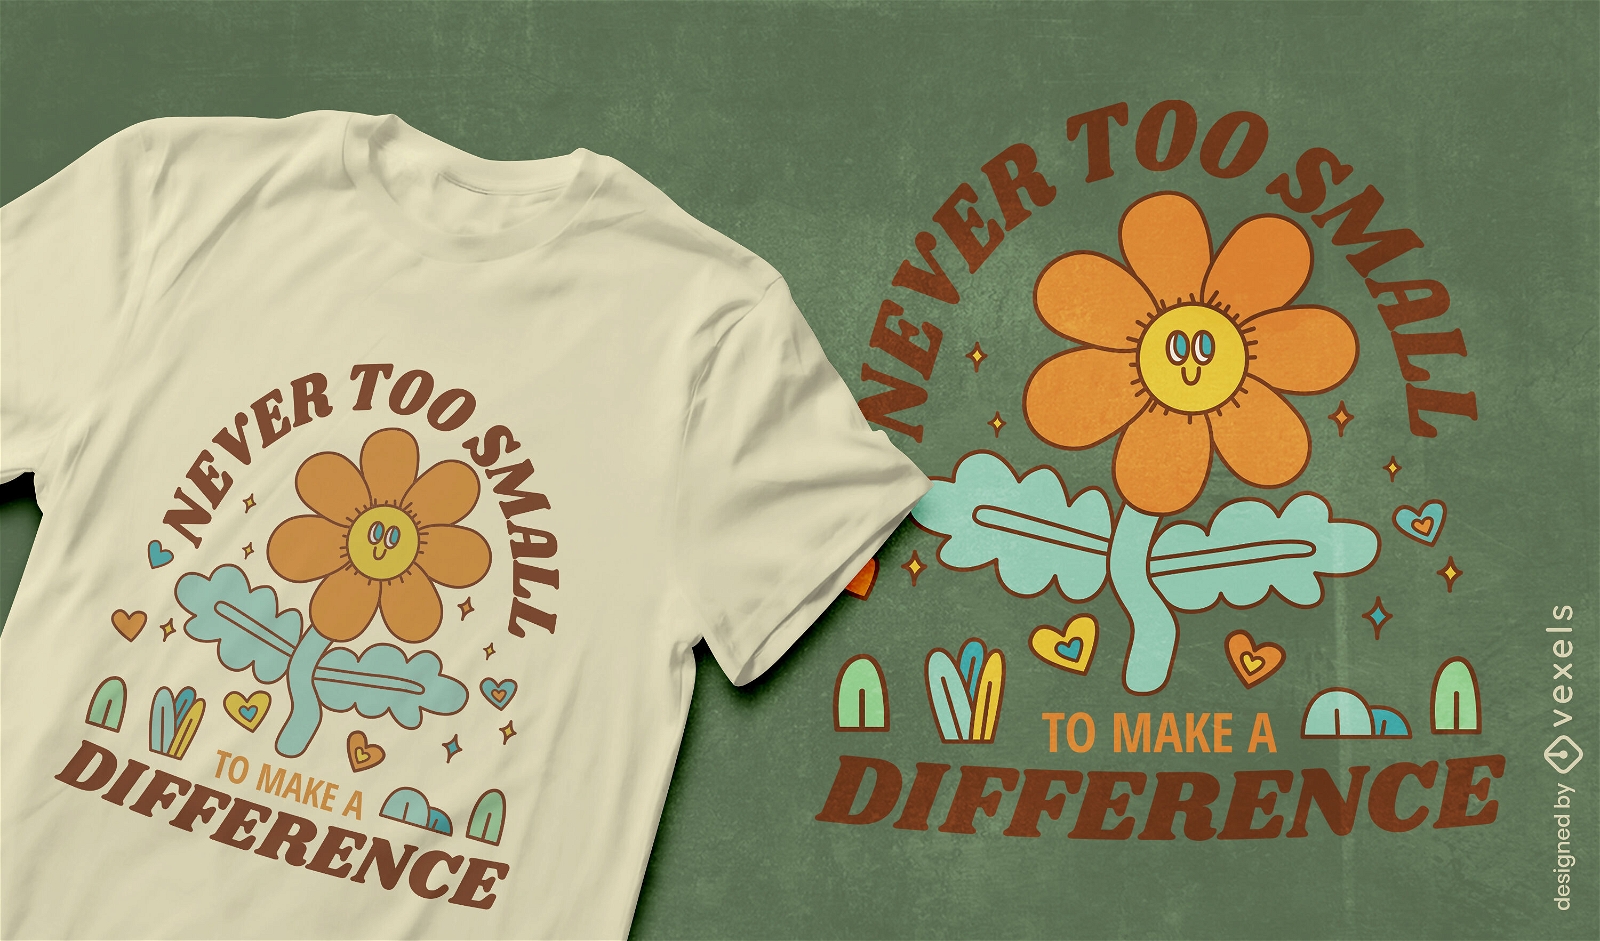 Make a difference Earth Day t-shirt design